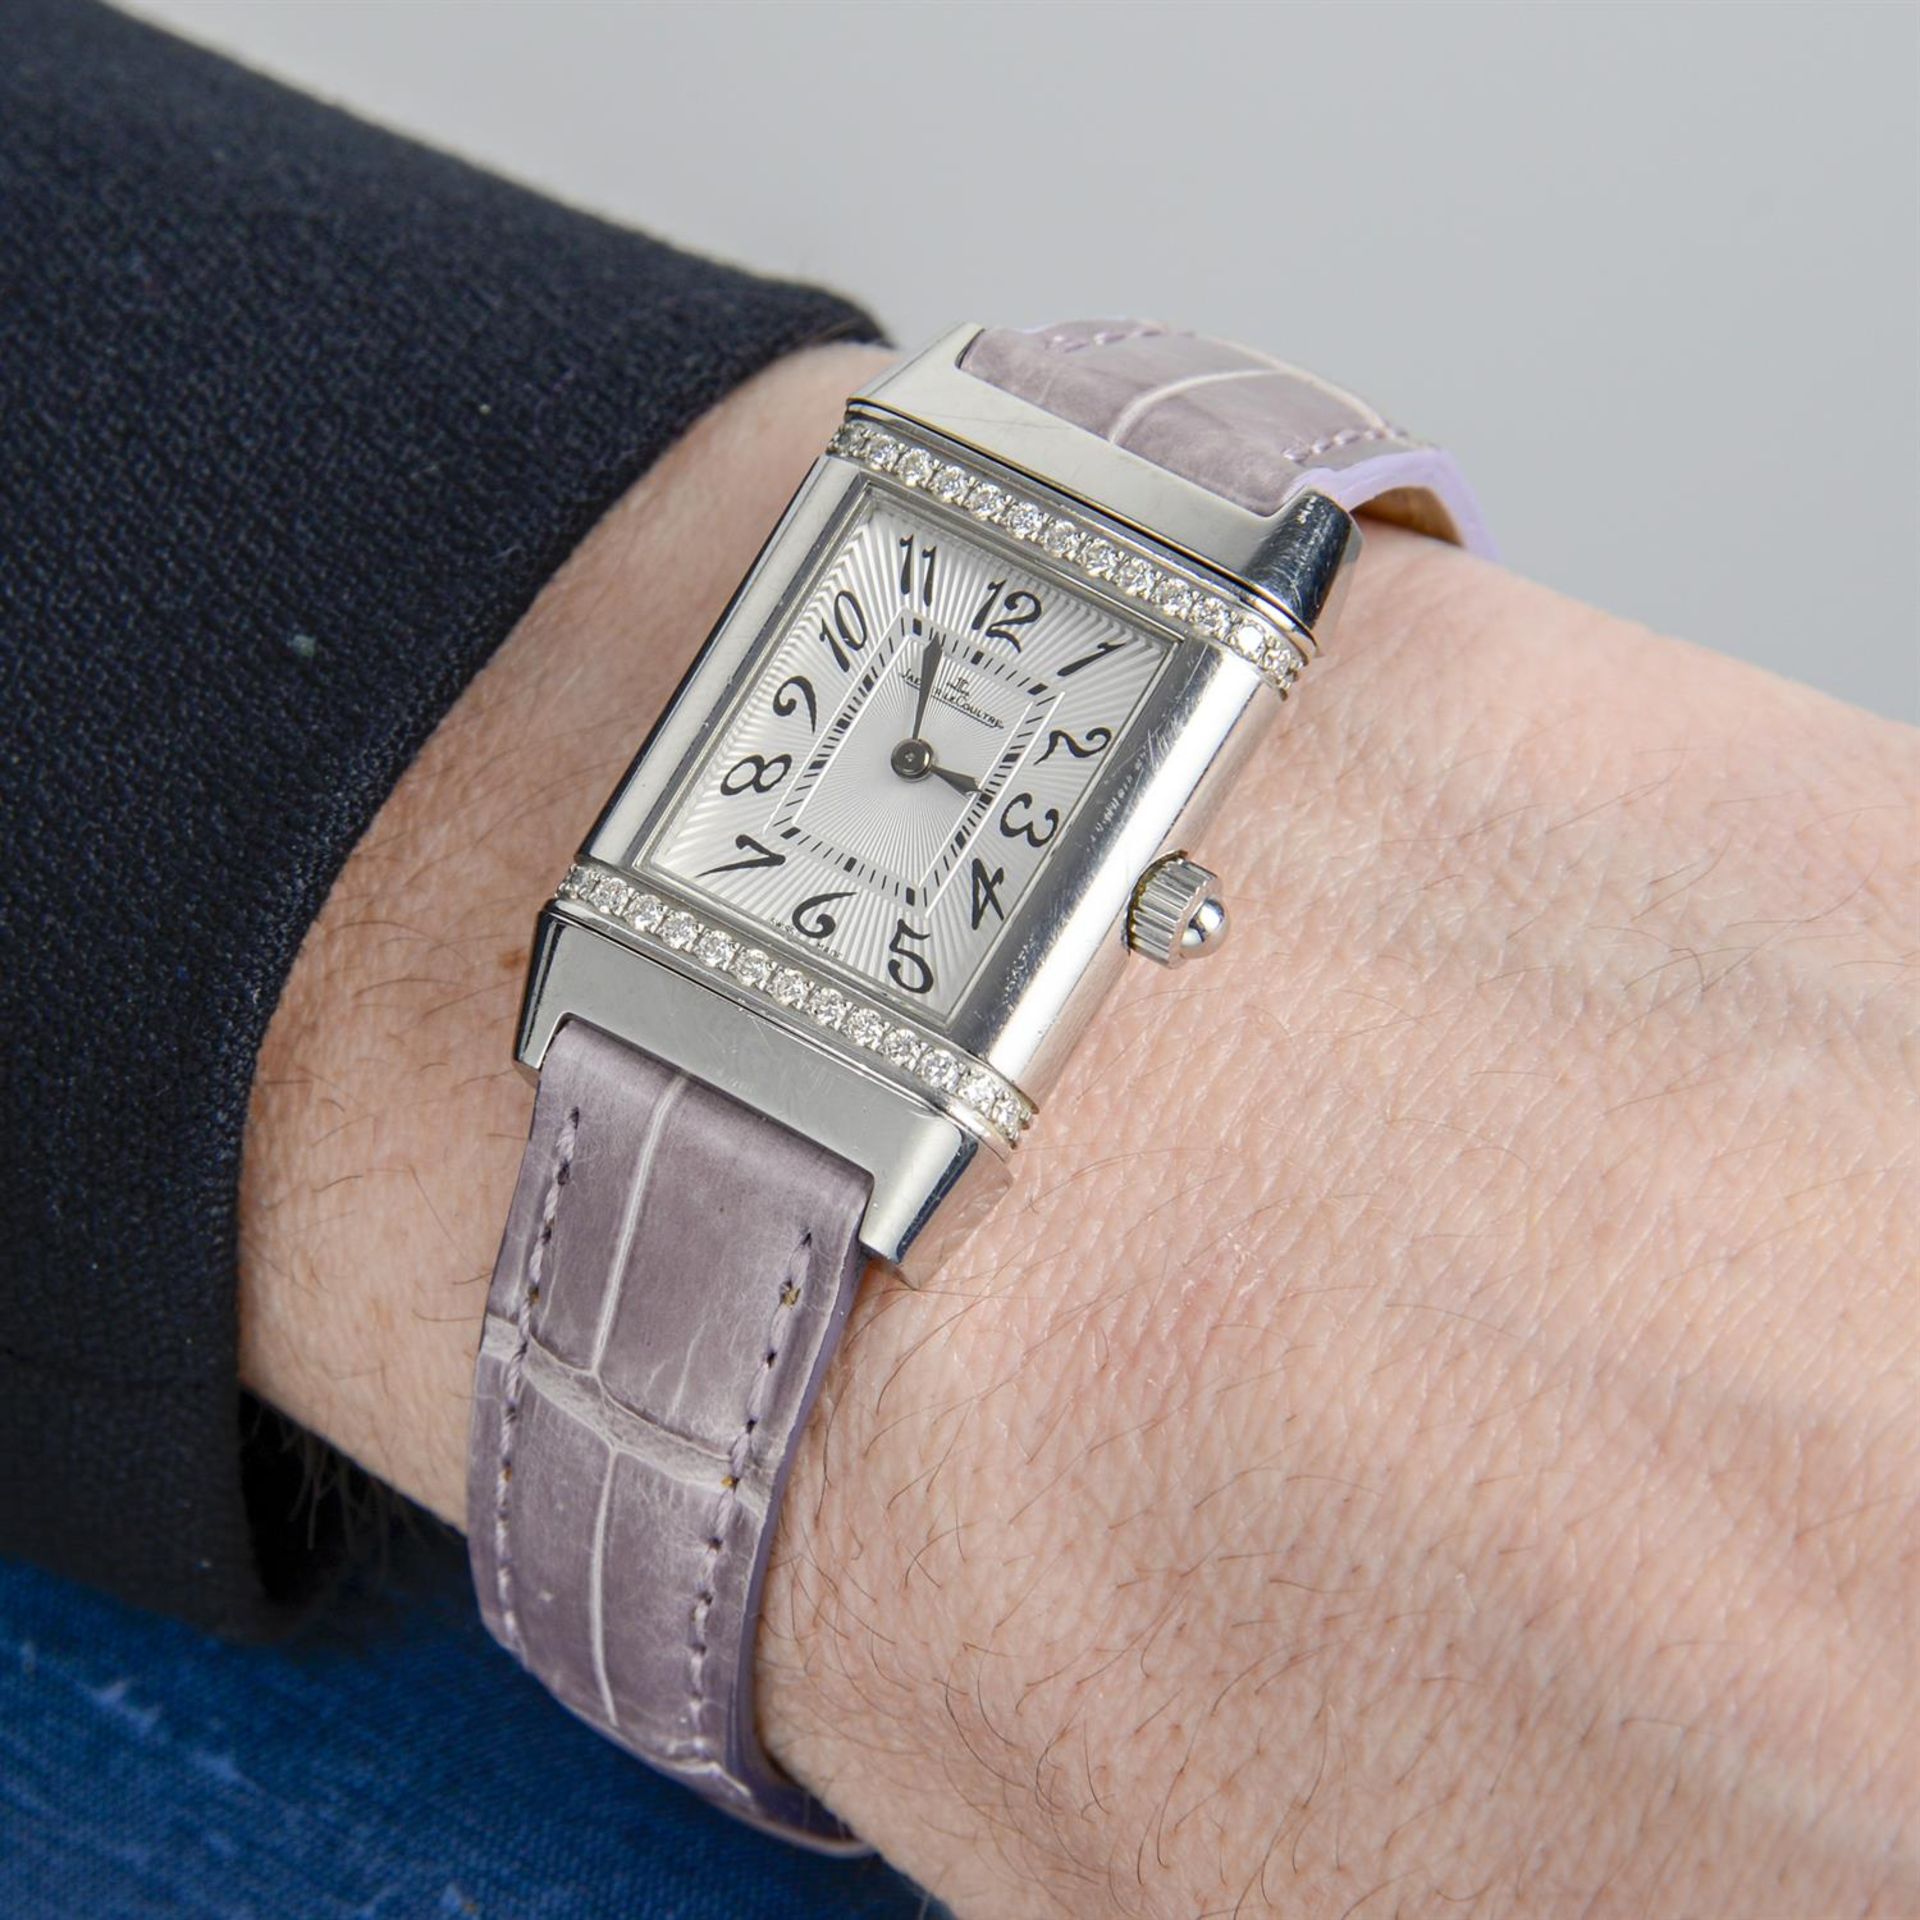 Jaeger-LeCoultre - a Reverso Florale watch, 20mm. - Image 6 of 6